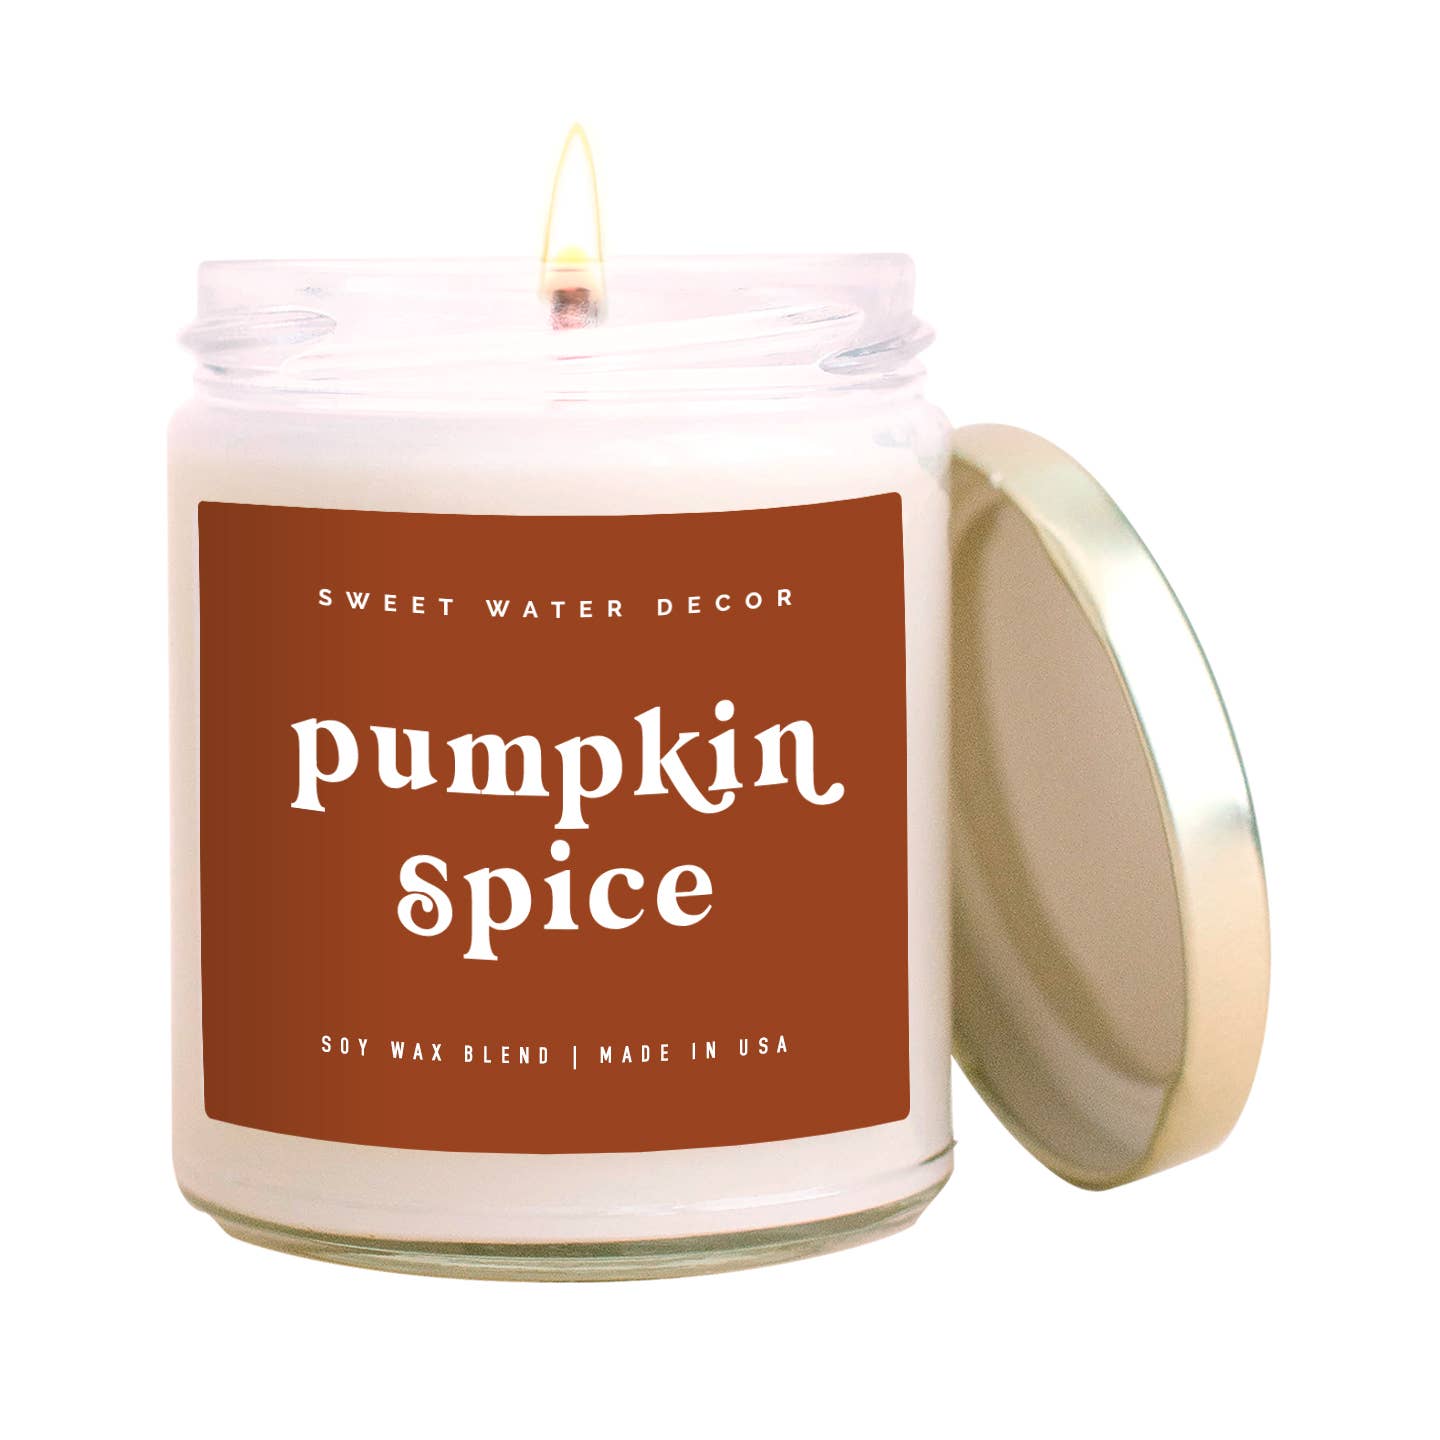 Sweet Water Decor - Pumpkin Spice 9 oz Soy Candle